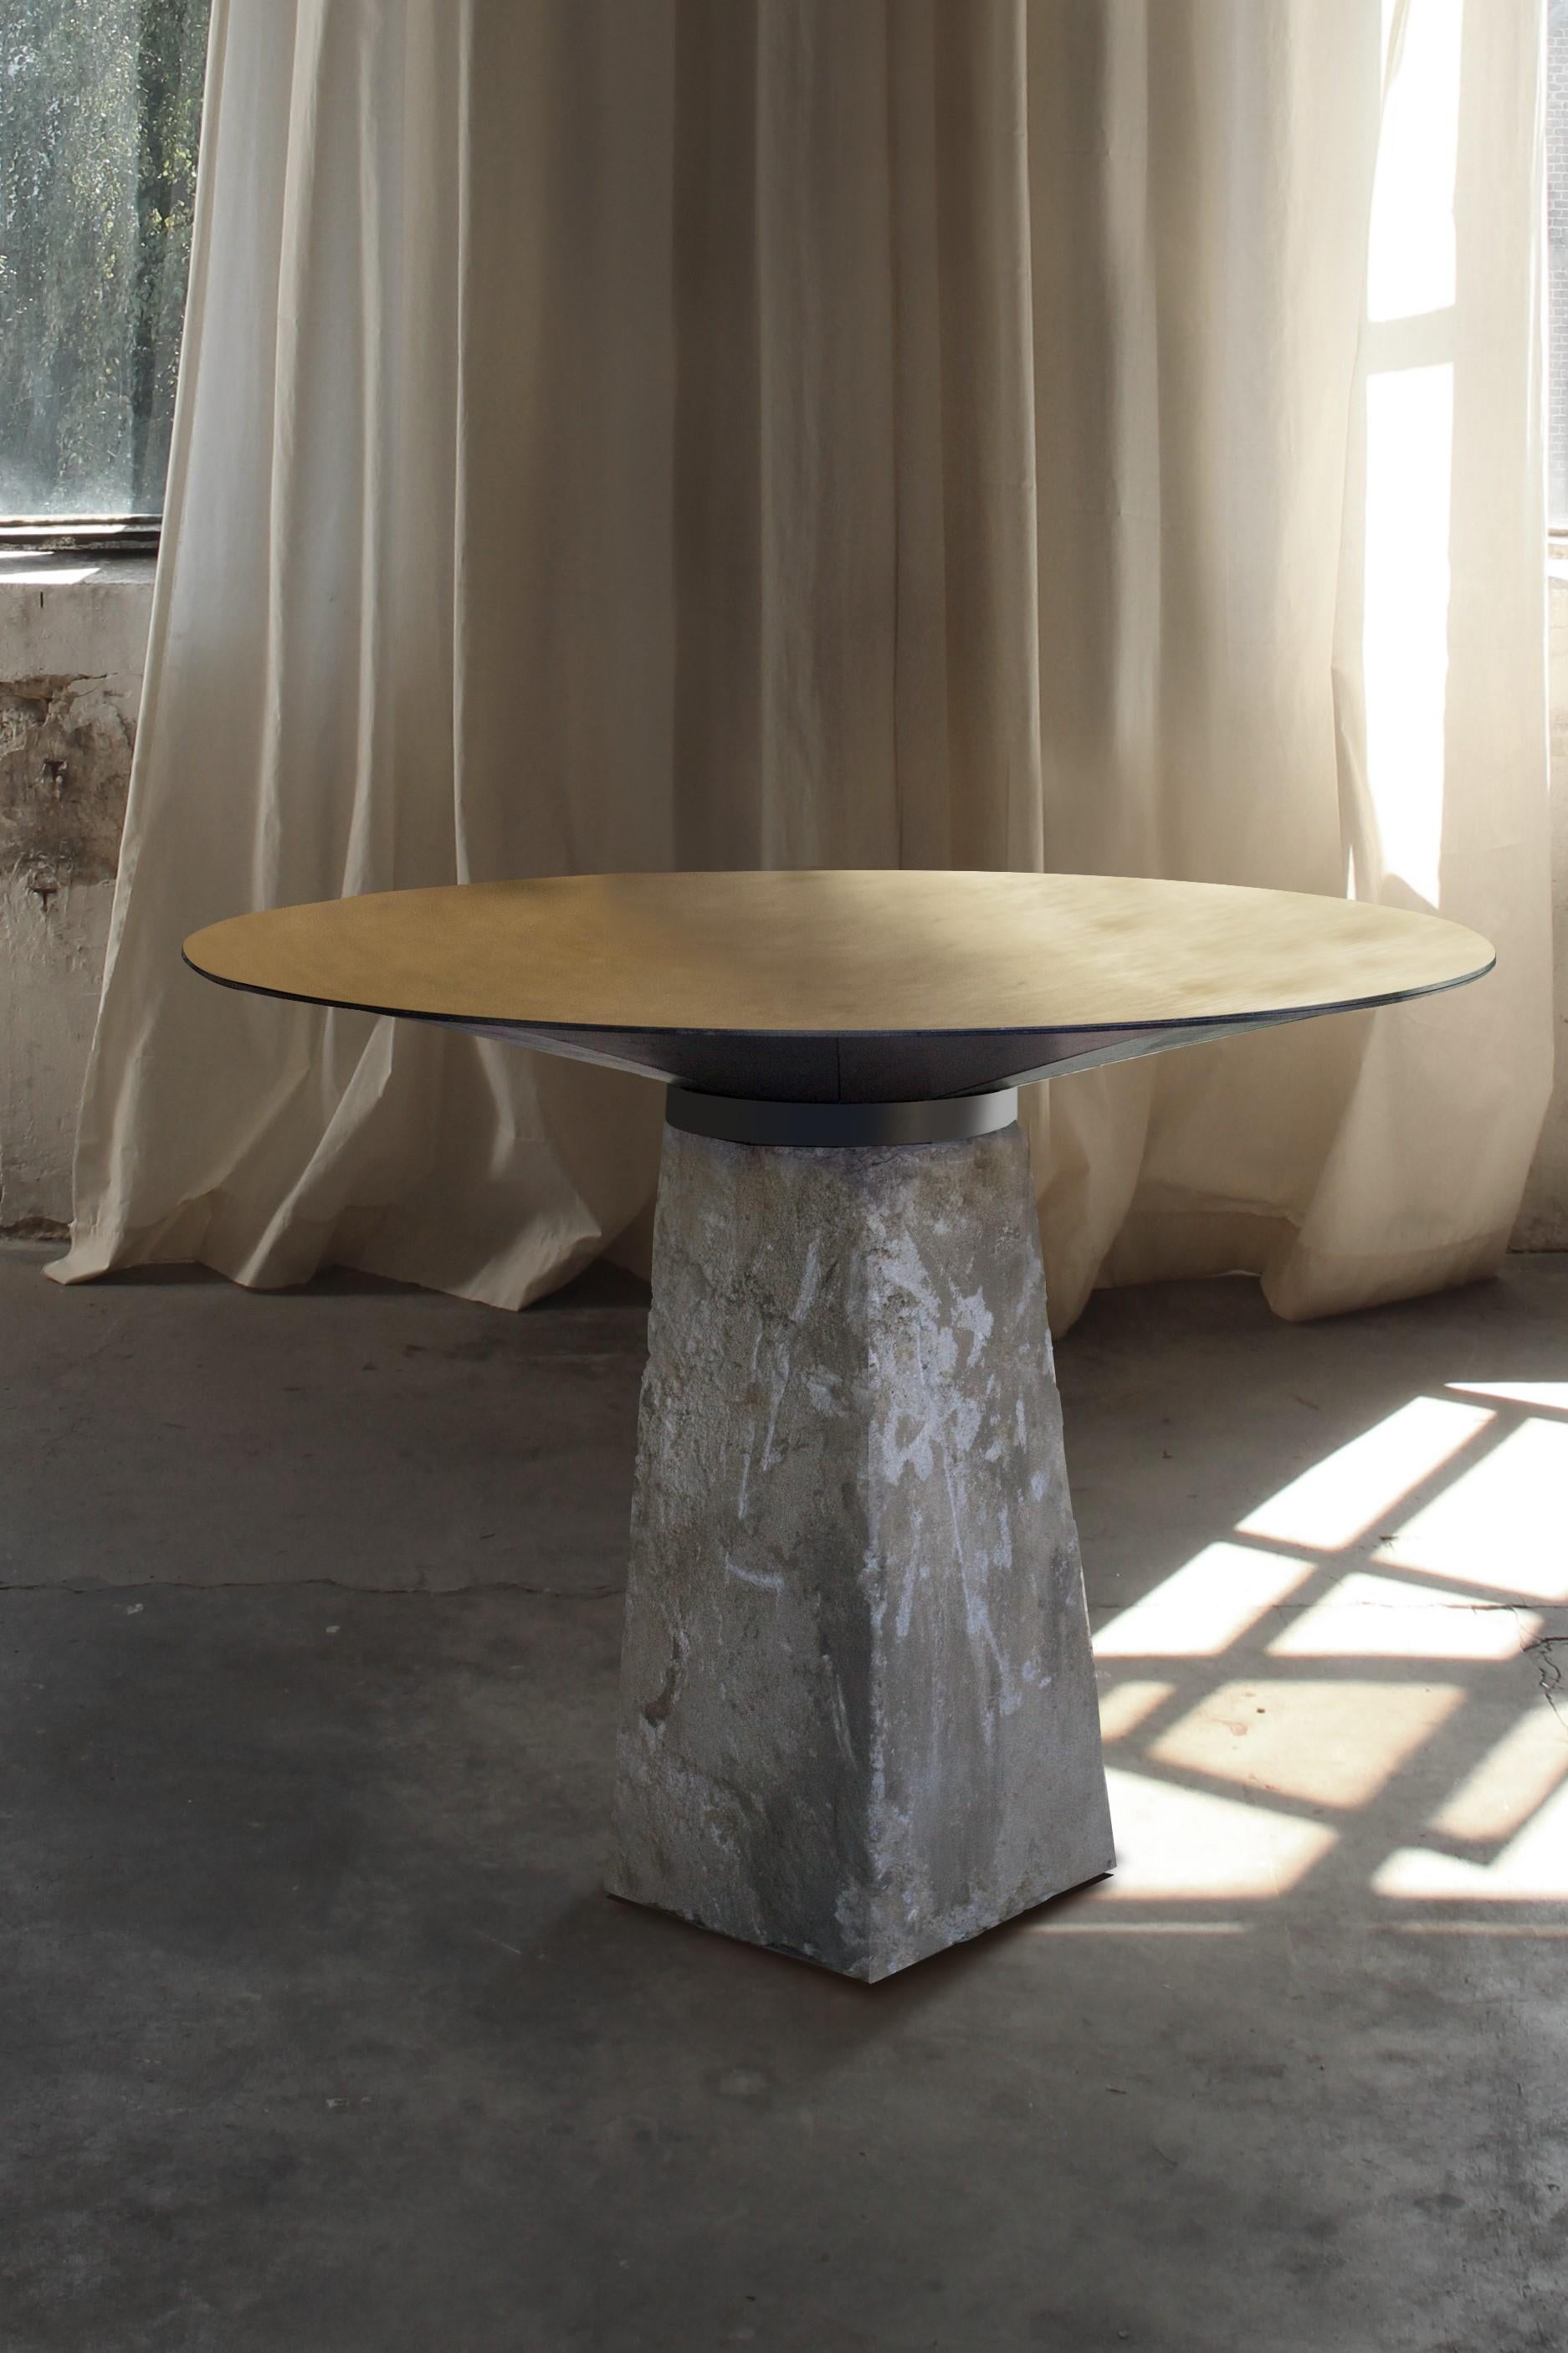 CBS_1 table by Jan Garncarek
Limited edition of 8 pieces
Signed 
Dimensions: 100 x 73 cm
Materials: Brass, steel, concrete.
Weight: 150 kg

The table is made out from unique elements. This piece has the concrete base - a vintage pedestal which is